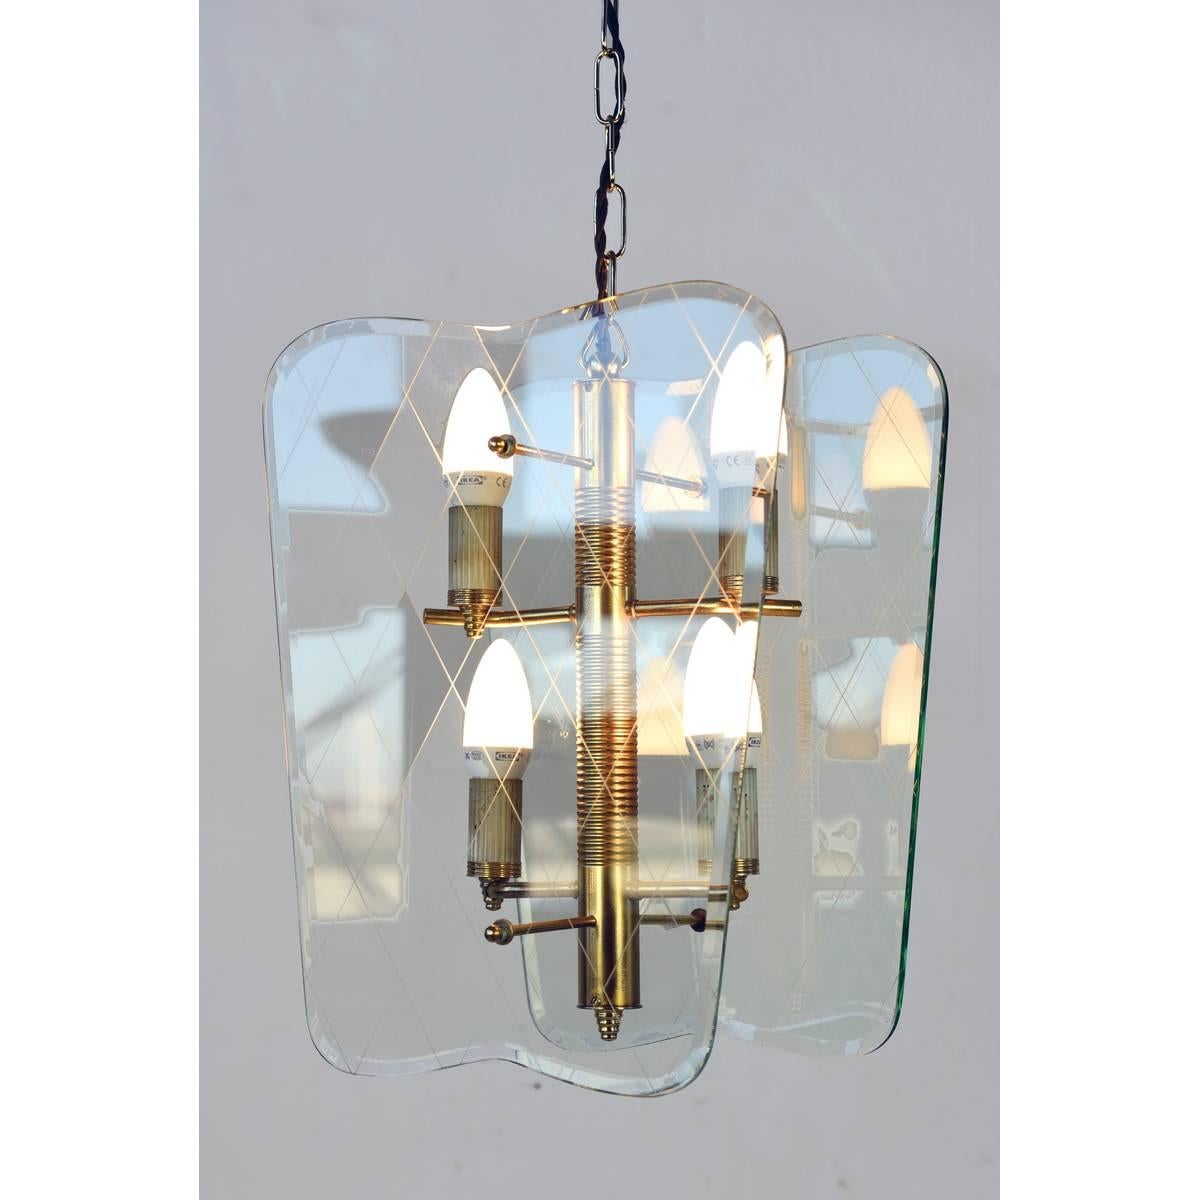 Plated 1940s Cut-Glass Pendant Lamp by Fontana Arte, Italy For Sale